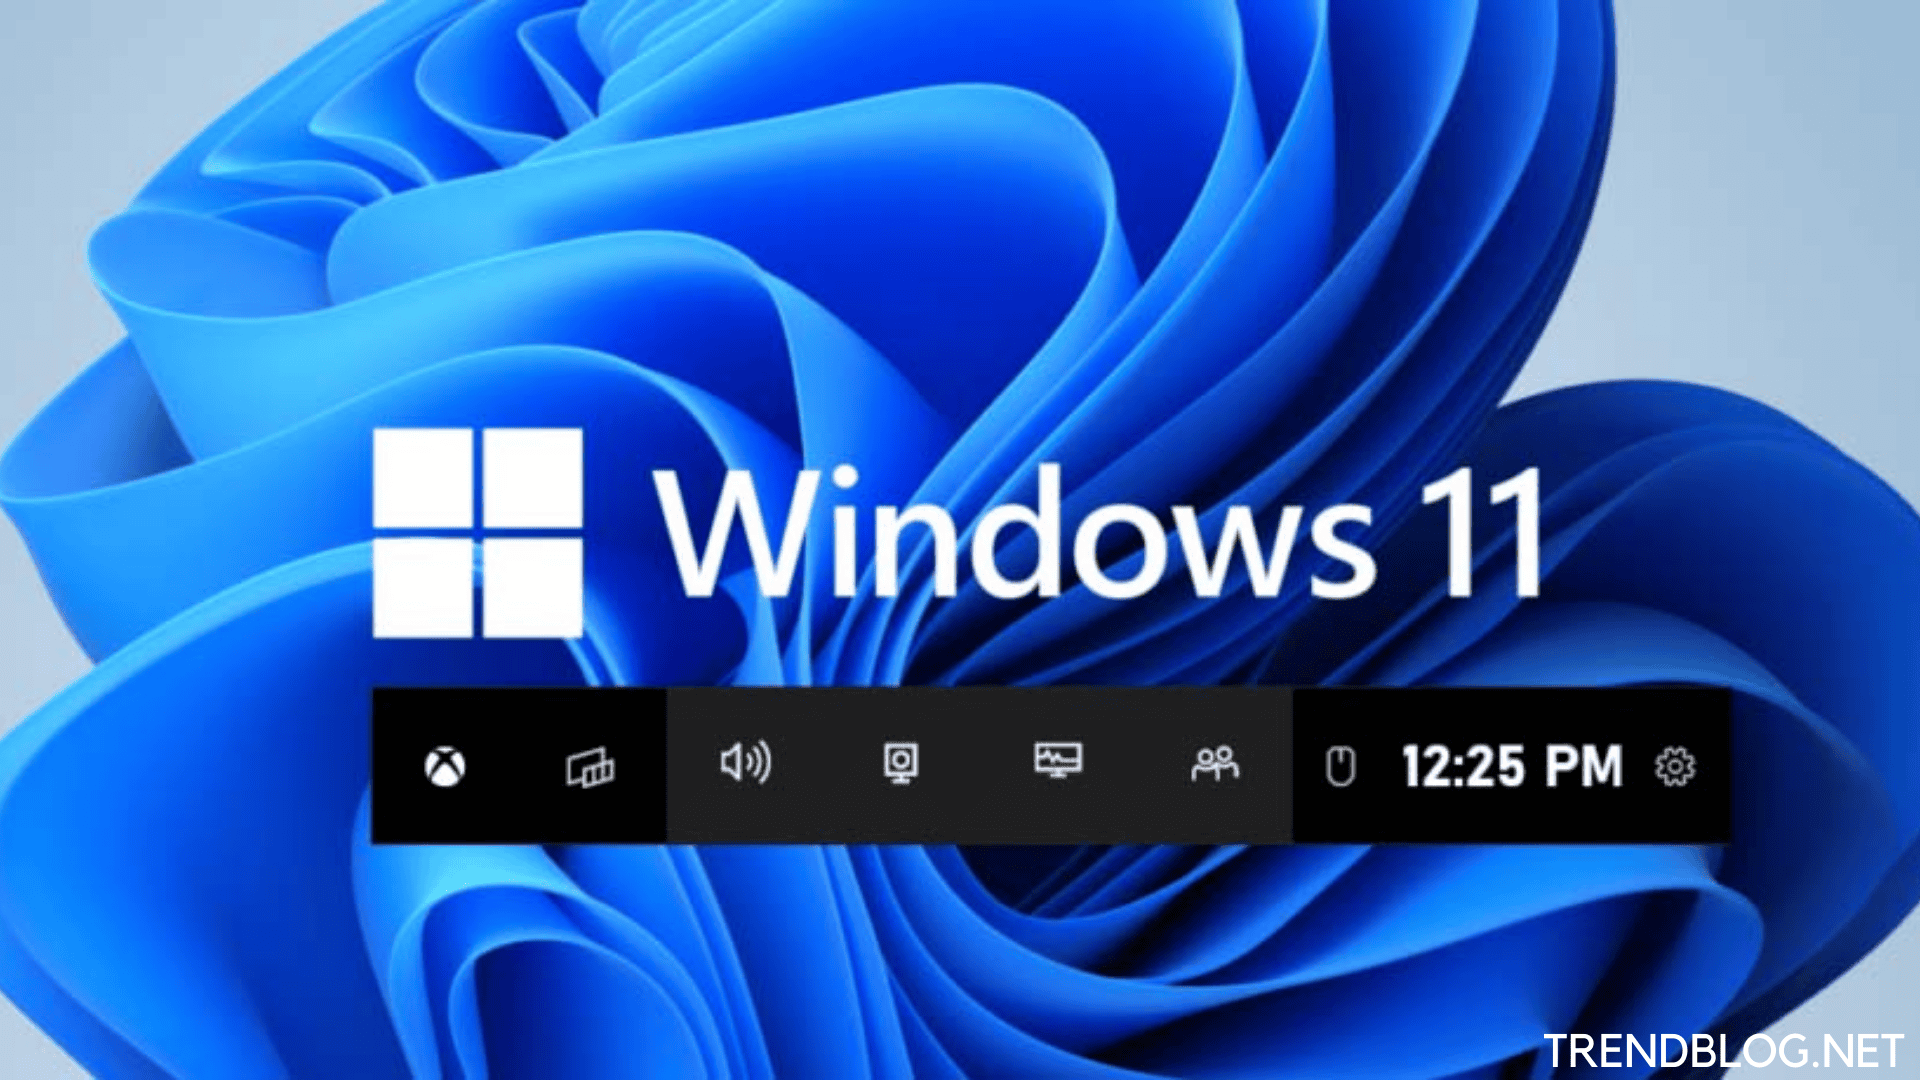  How to Screen Recorder on Windows 11 Using 5 Unique Ways